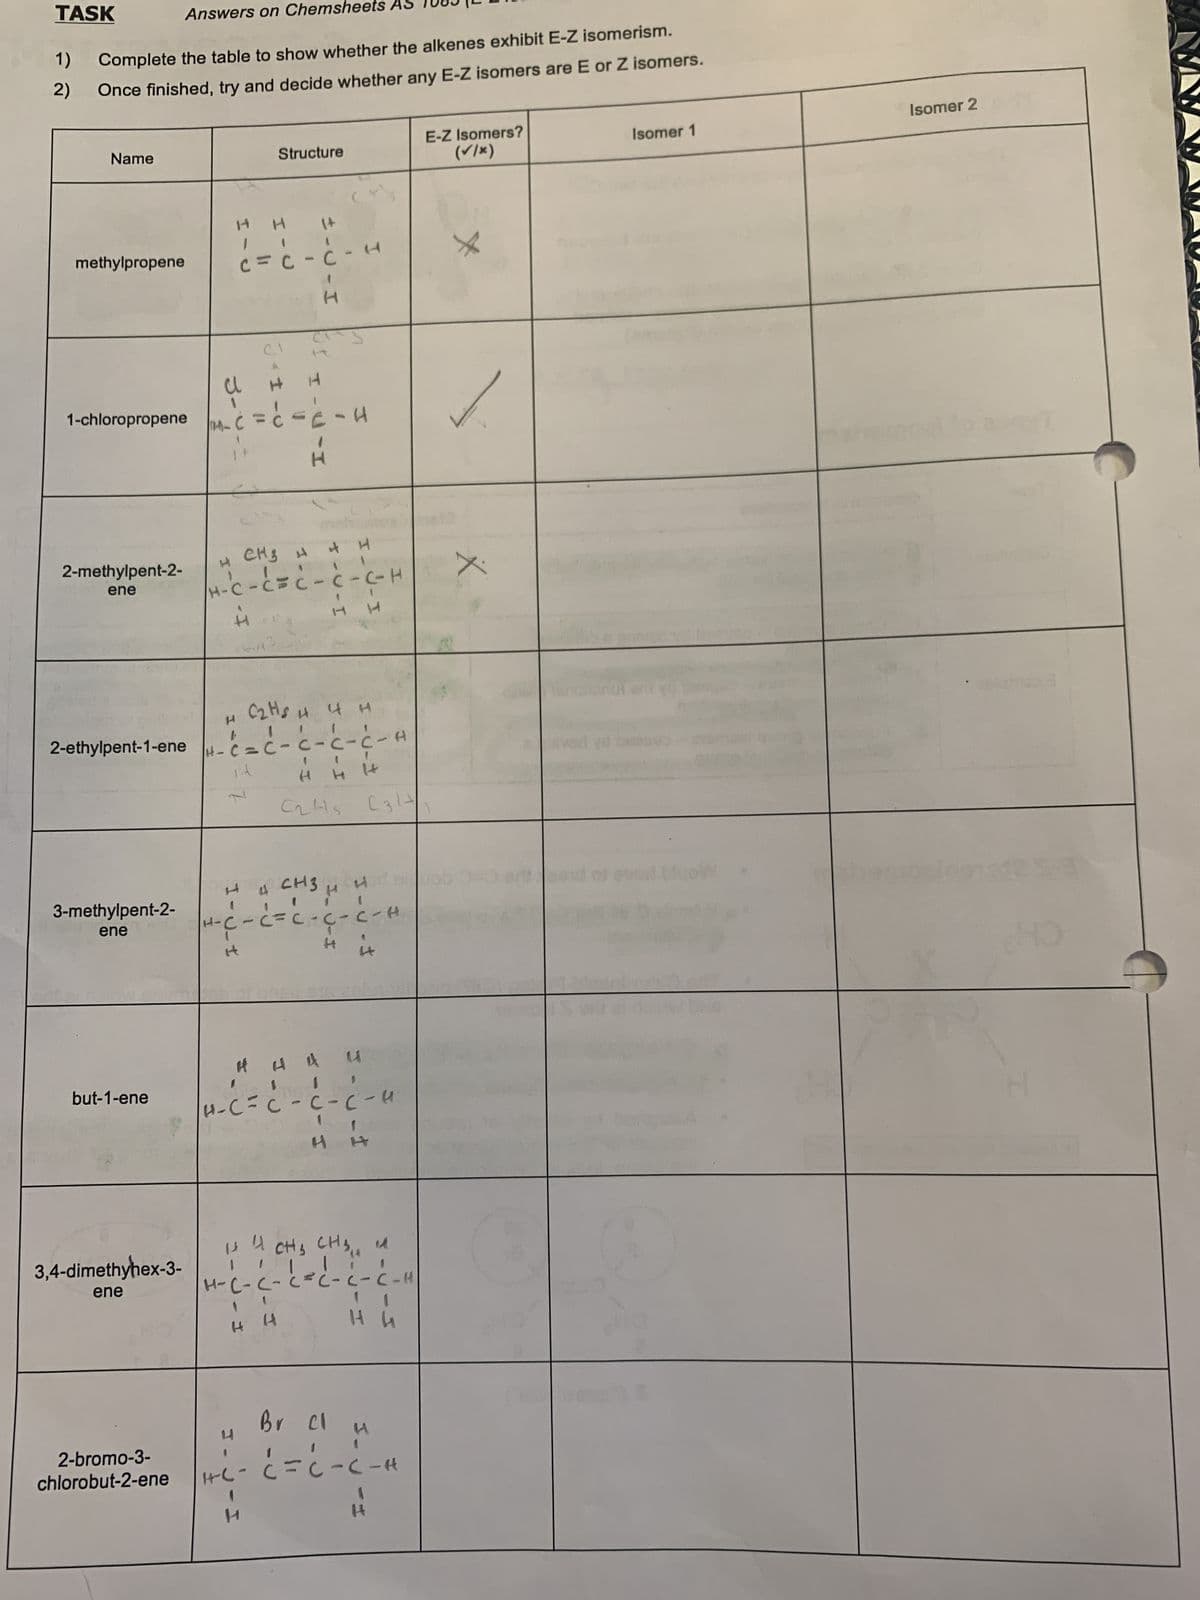 TASK
1)
2)
Complete the table to show whether the alkenes exhibit E-Z isomerism.
Once finished, try and decide whether any E-Z isomers are E or Z isomers.
Name
methylpropene
1-chloropropene
2-methylpent-2-
ene
Answers on Chemsheets
3-methylpent-2-
ene
but-1-ene
3,4-dimethyhex-3-
ene
2-bromo-3-
chlorobut-2-ene
3-
CHIC
H-U
H
VI
14
Structure
7
H
1+
C-C-H
±-U-I
MC=CIRIH
H CH3 H
H-C-CCICIC-H
C₂ HS H
2-ethylpent-1-ene H-C=C-C-C-C-A
H
C2415
H
HH
H
CITS
H
IT-UTI
H
I_V_I
-C-H
4 H
H 4 CH3
H-C-C=C-C-C-H
4
it it
H
HH
Br cl
4 4 4 4
H-C = C-C-C-4
HD
C314
14 41 CH₂ CH₂, t
li
H-C-C- C = C-C-C-H
НИ
H H
И
H-C- C=C-C-H
H
E-Z Isomers?
(V/x)
✓
X
Isomer 1
Isomer 2
hod
PELO
lomate S-3
HD